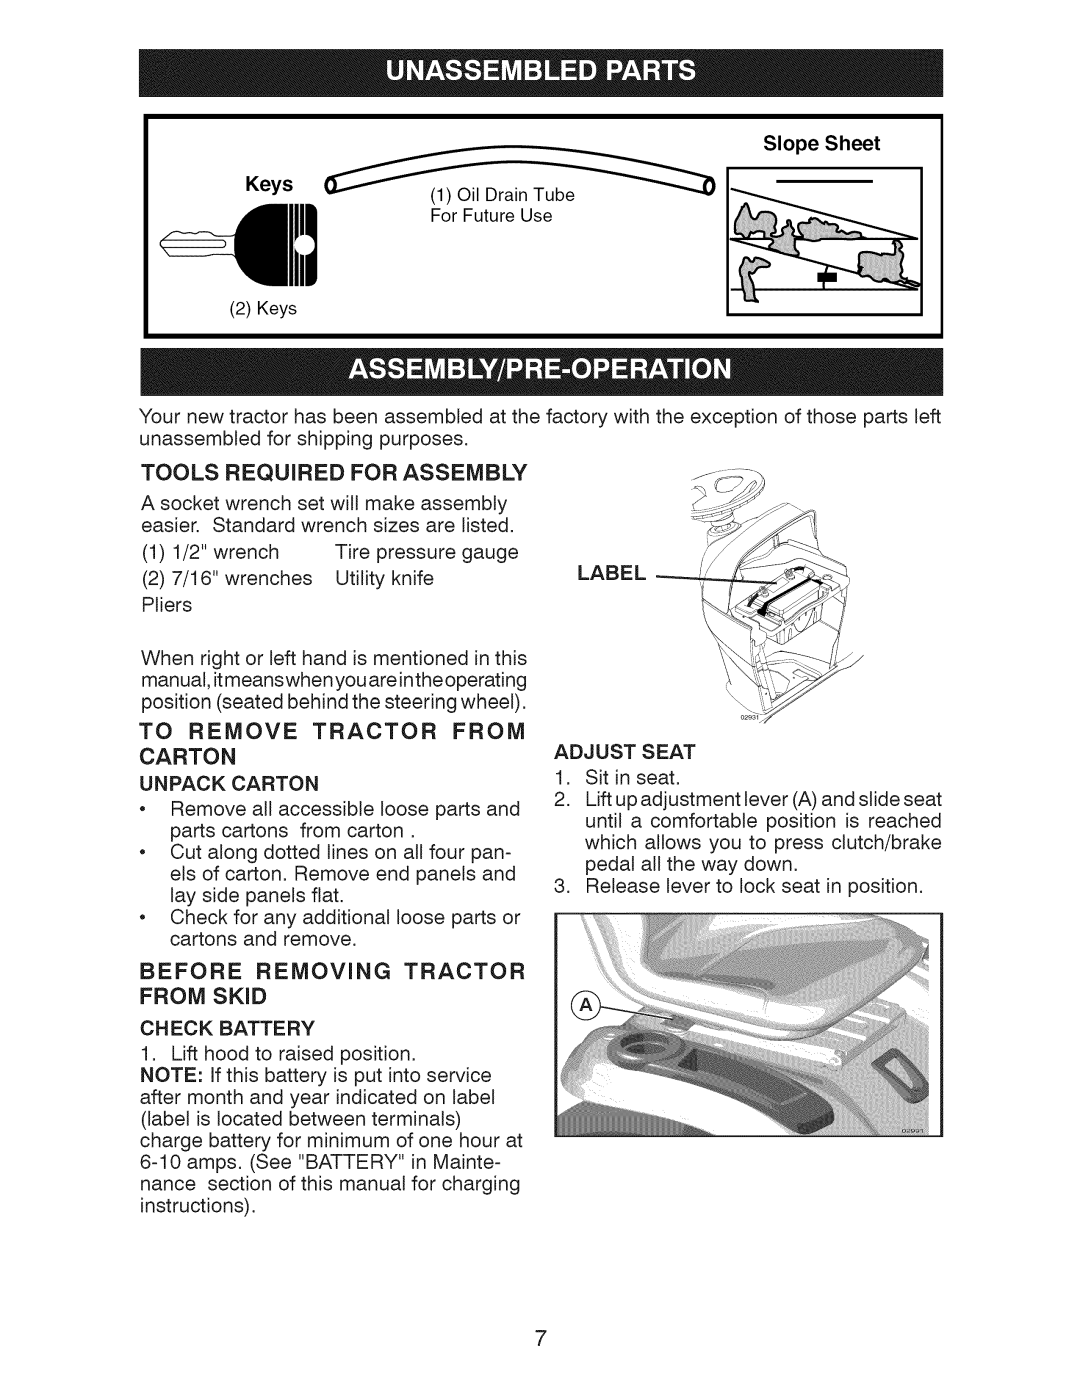 Craftsman 917.289283 owner manual FROM SKiD, Before Removing Tractor 